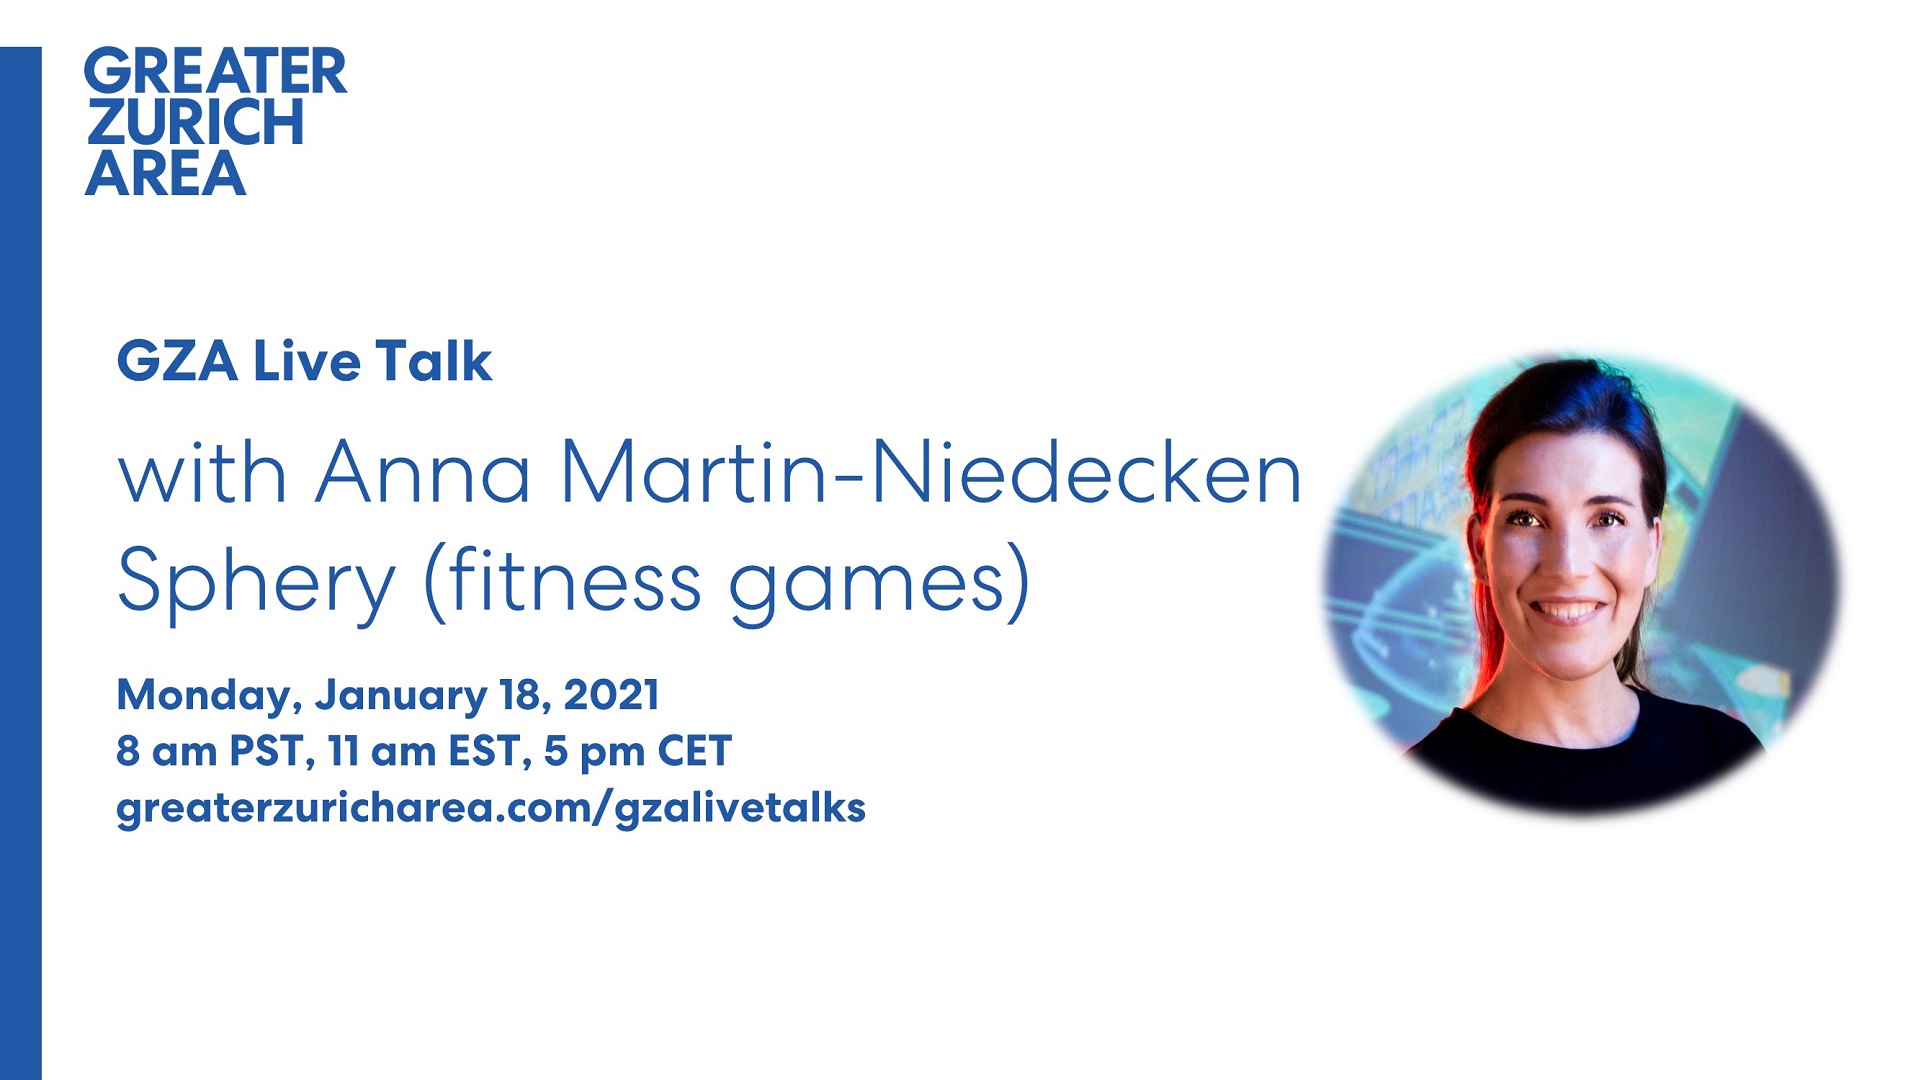 Join the GZA Live Talk with Anna Martin-Niedecken, Sphery (fitness games)